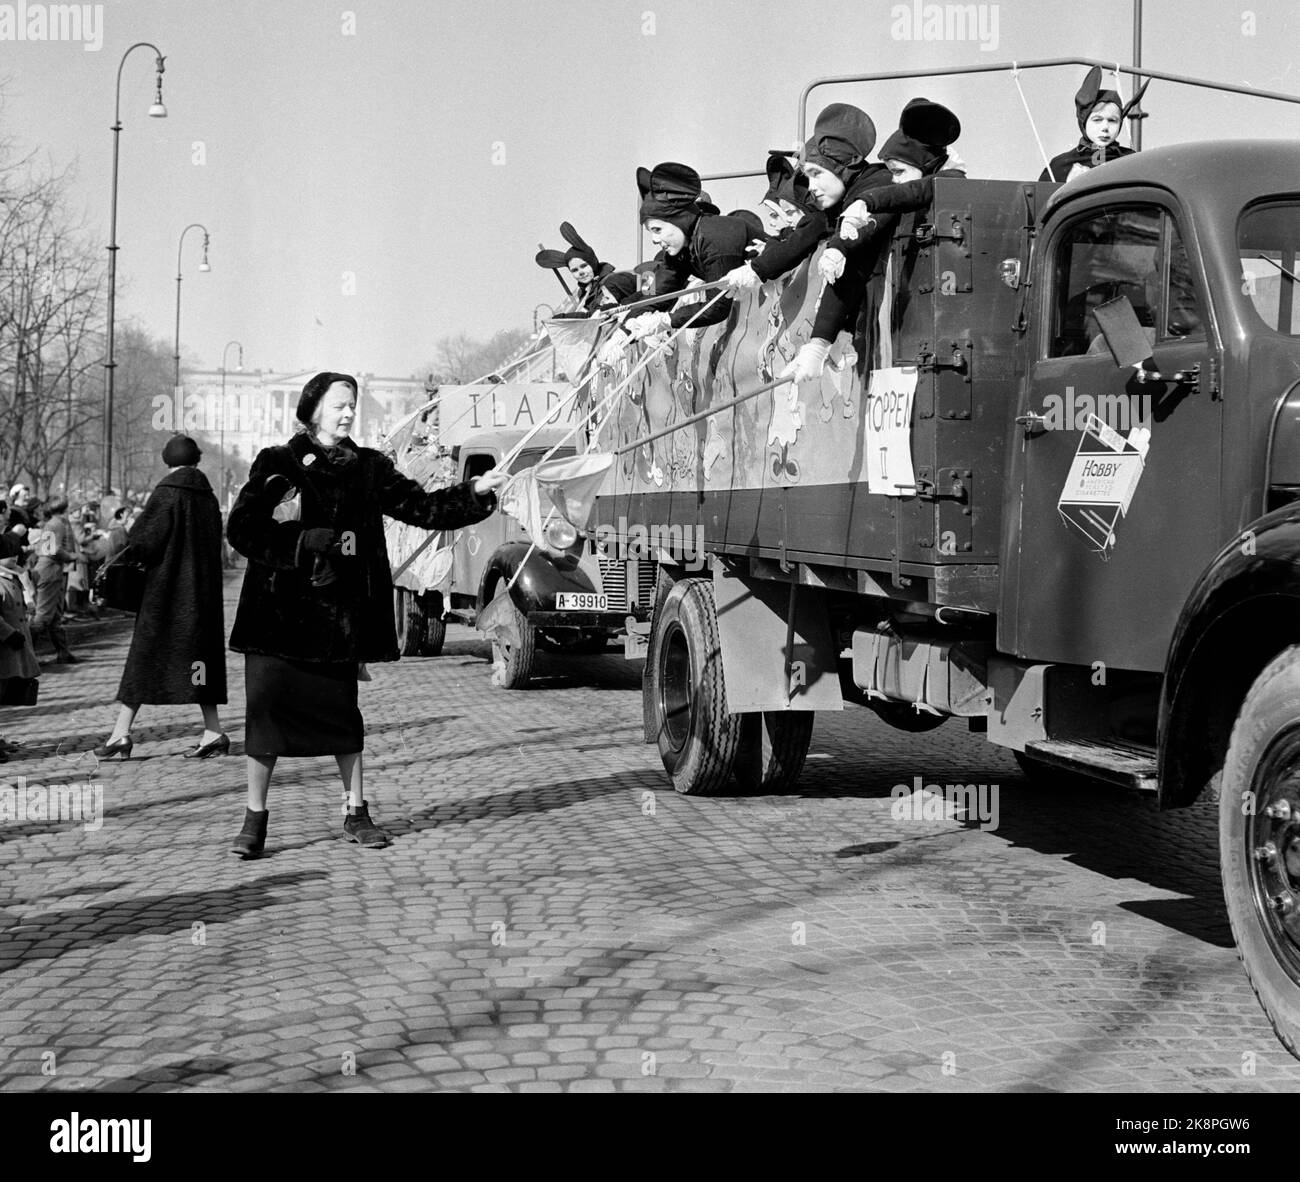 Oslo 19570330 The Children's Week in Oslo opened with a shortcut through the city. Here from Karl Johans gate, a truck with children in costumes on the loading plane. The kids have hooves that people put money into. Cigarette advertising for the cigarette hobby on the truck. Photo: Stage / NTB / NTB Stock Photo